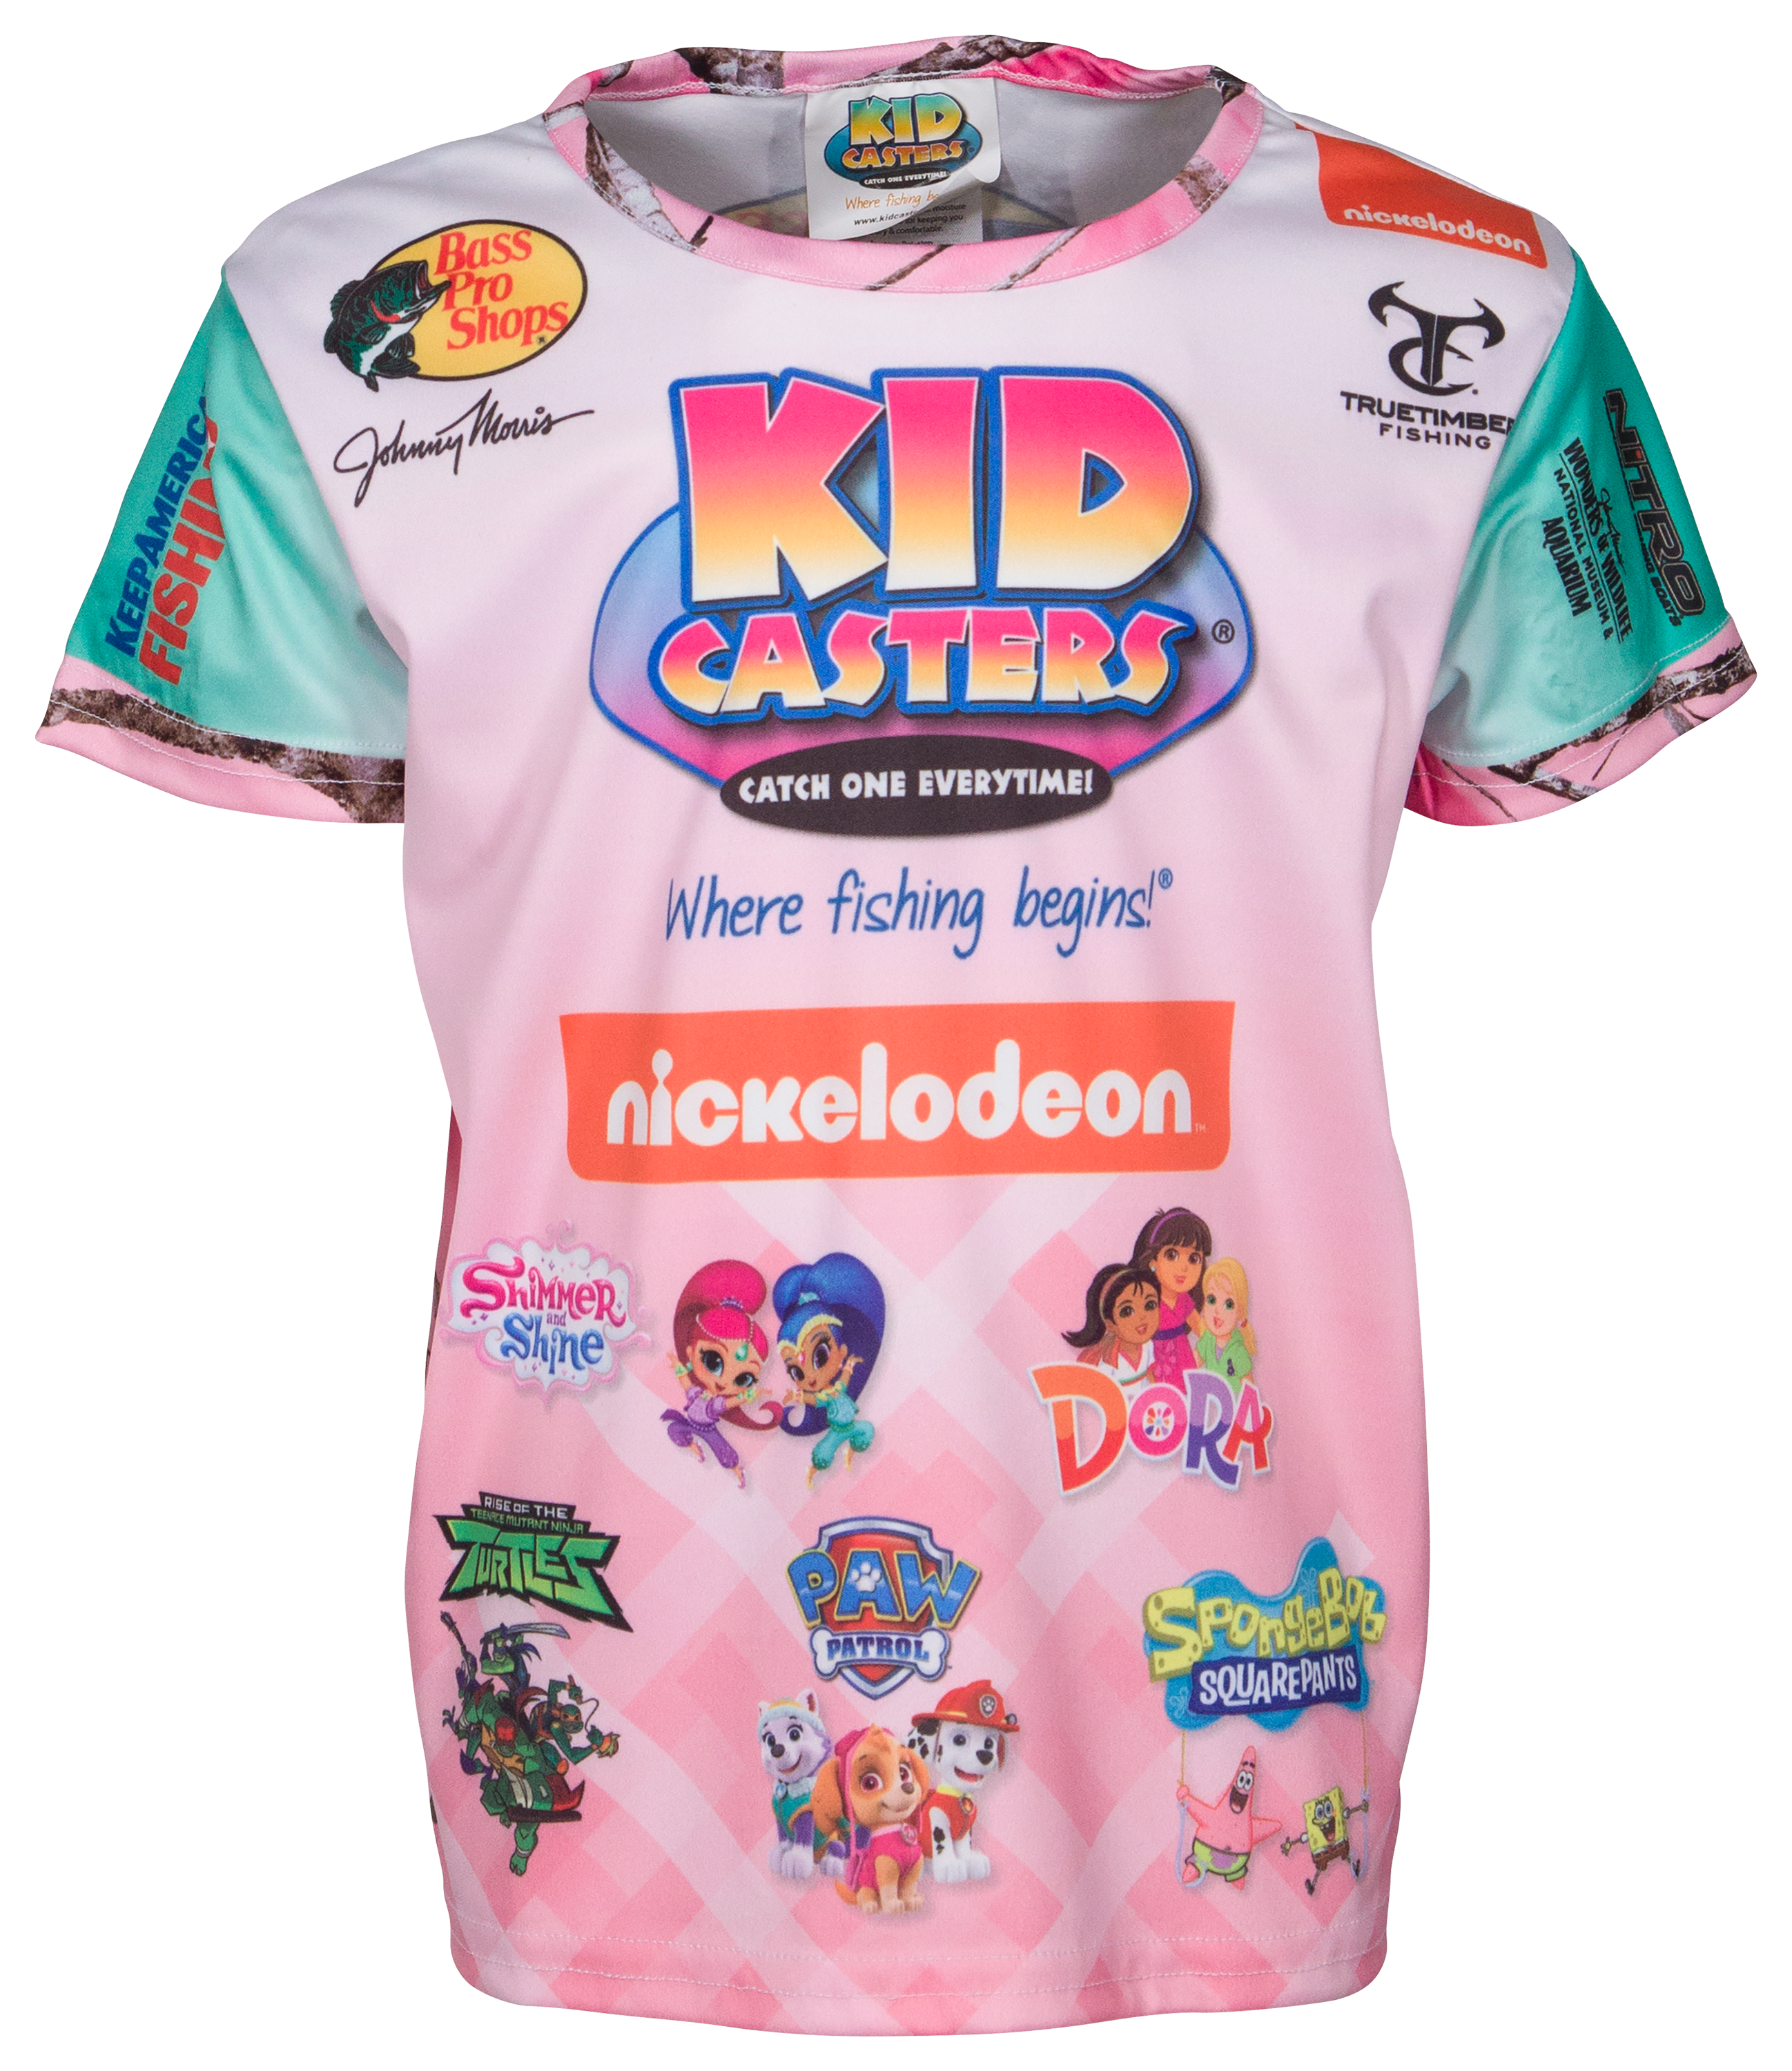 Bass Pro Shops Kid Casters Fishing Short-Sleeve Shirt for Toddlers